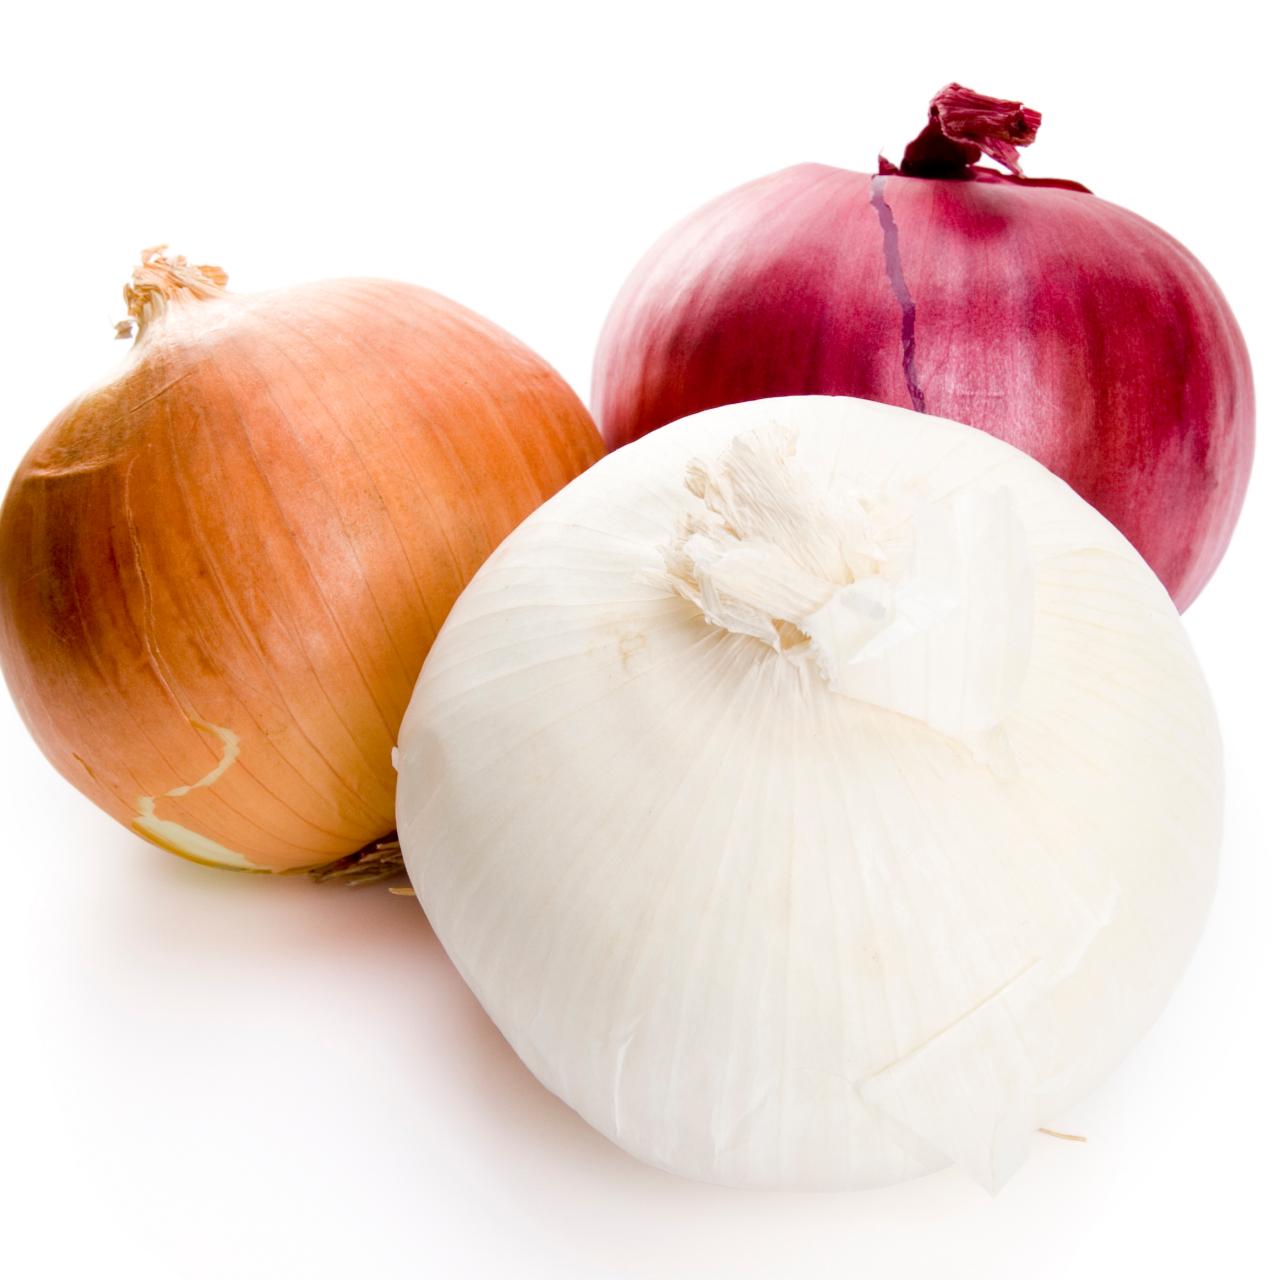 What Can I Substitute for Spanish Onion?